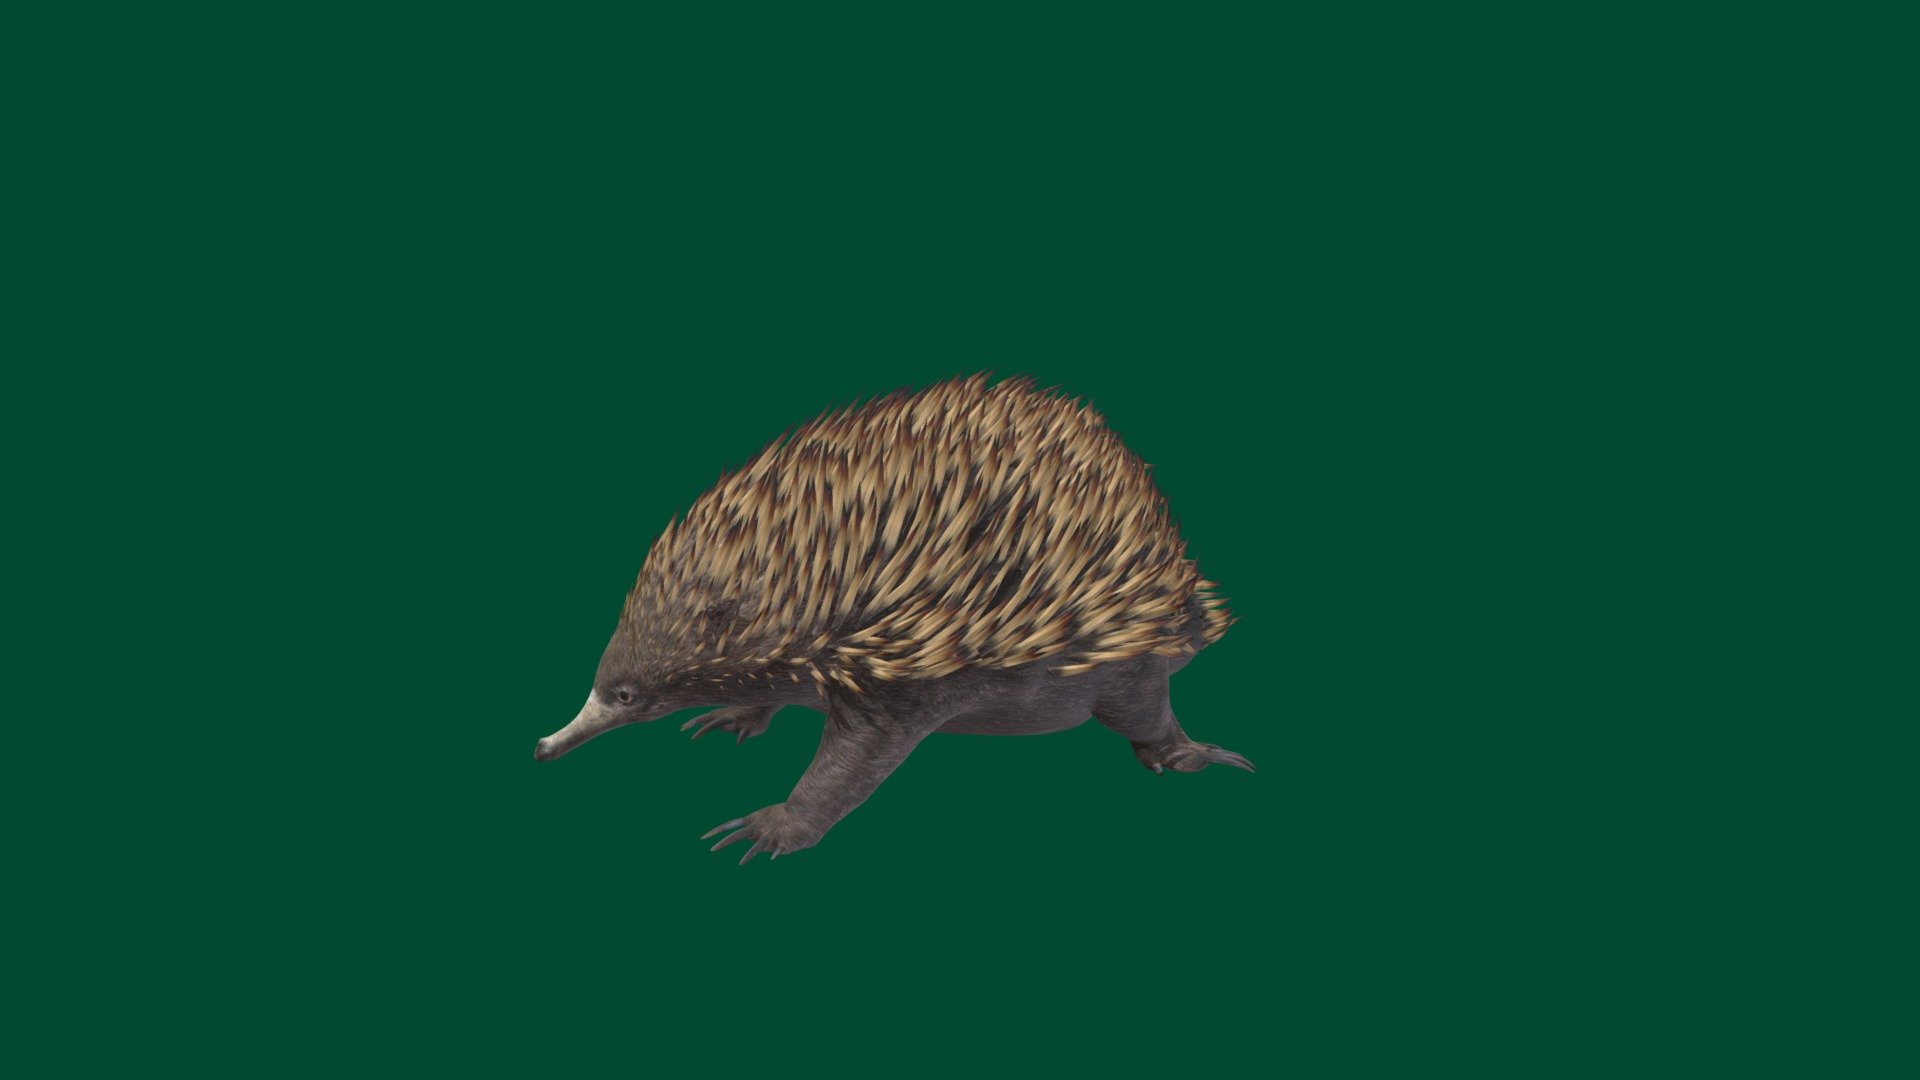 For_VR_Game_Animation_Test
Test Base 
Animation
Echidnas, sometimes known as spiny anteaters, are quill-covered monotremes belonging to the family Tachyglossidae. The four extant species of echidnas and the platypus are the only living mammals that lay eggs and the only surviving members of the order Monotremata 3d model